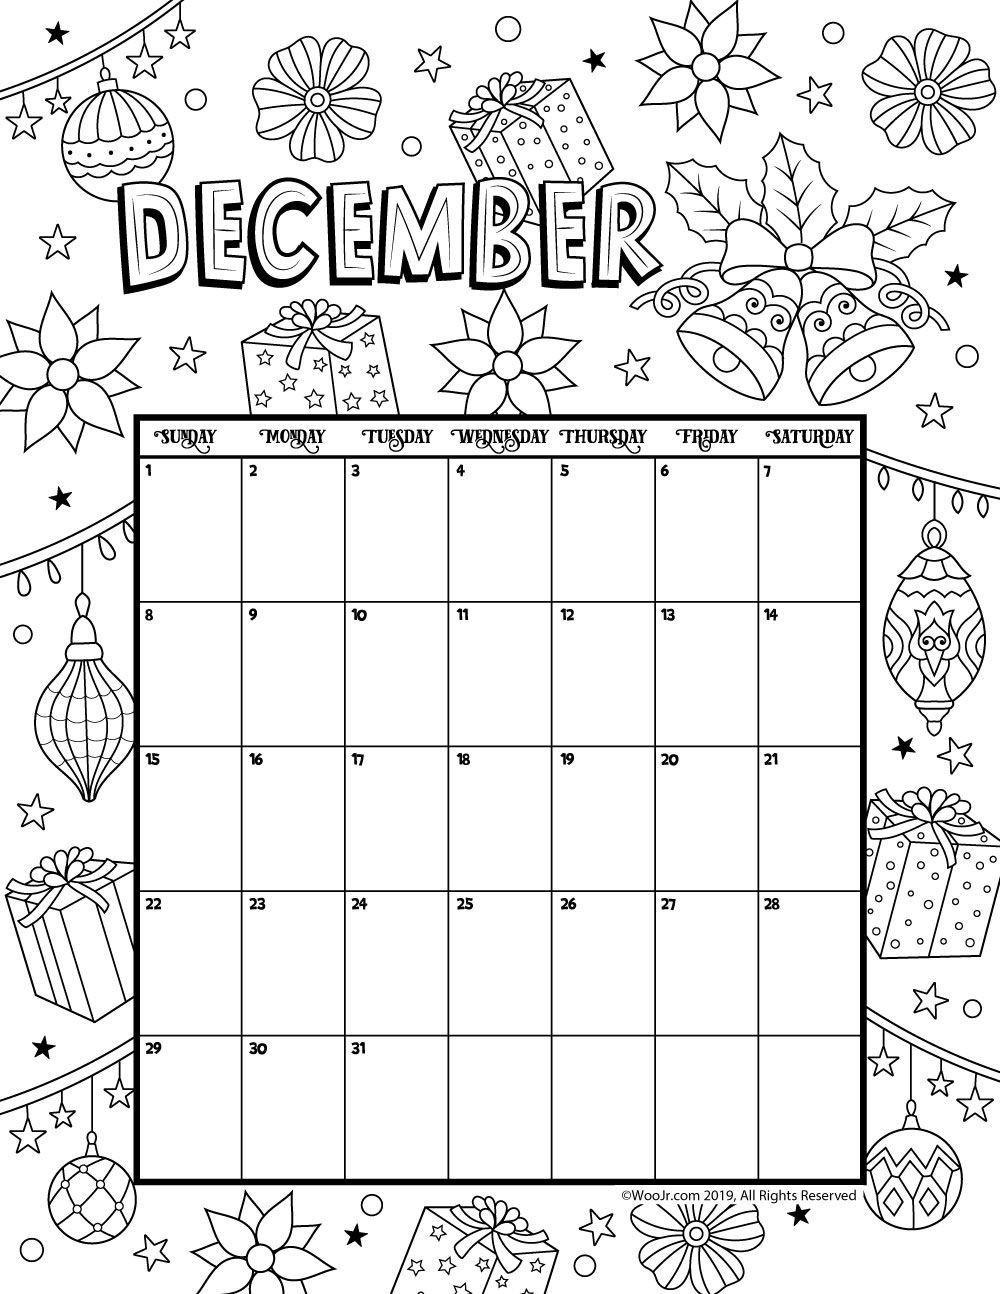 December 2019 Coloring Calendar (With Images) | Coloring